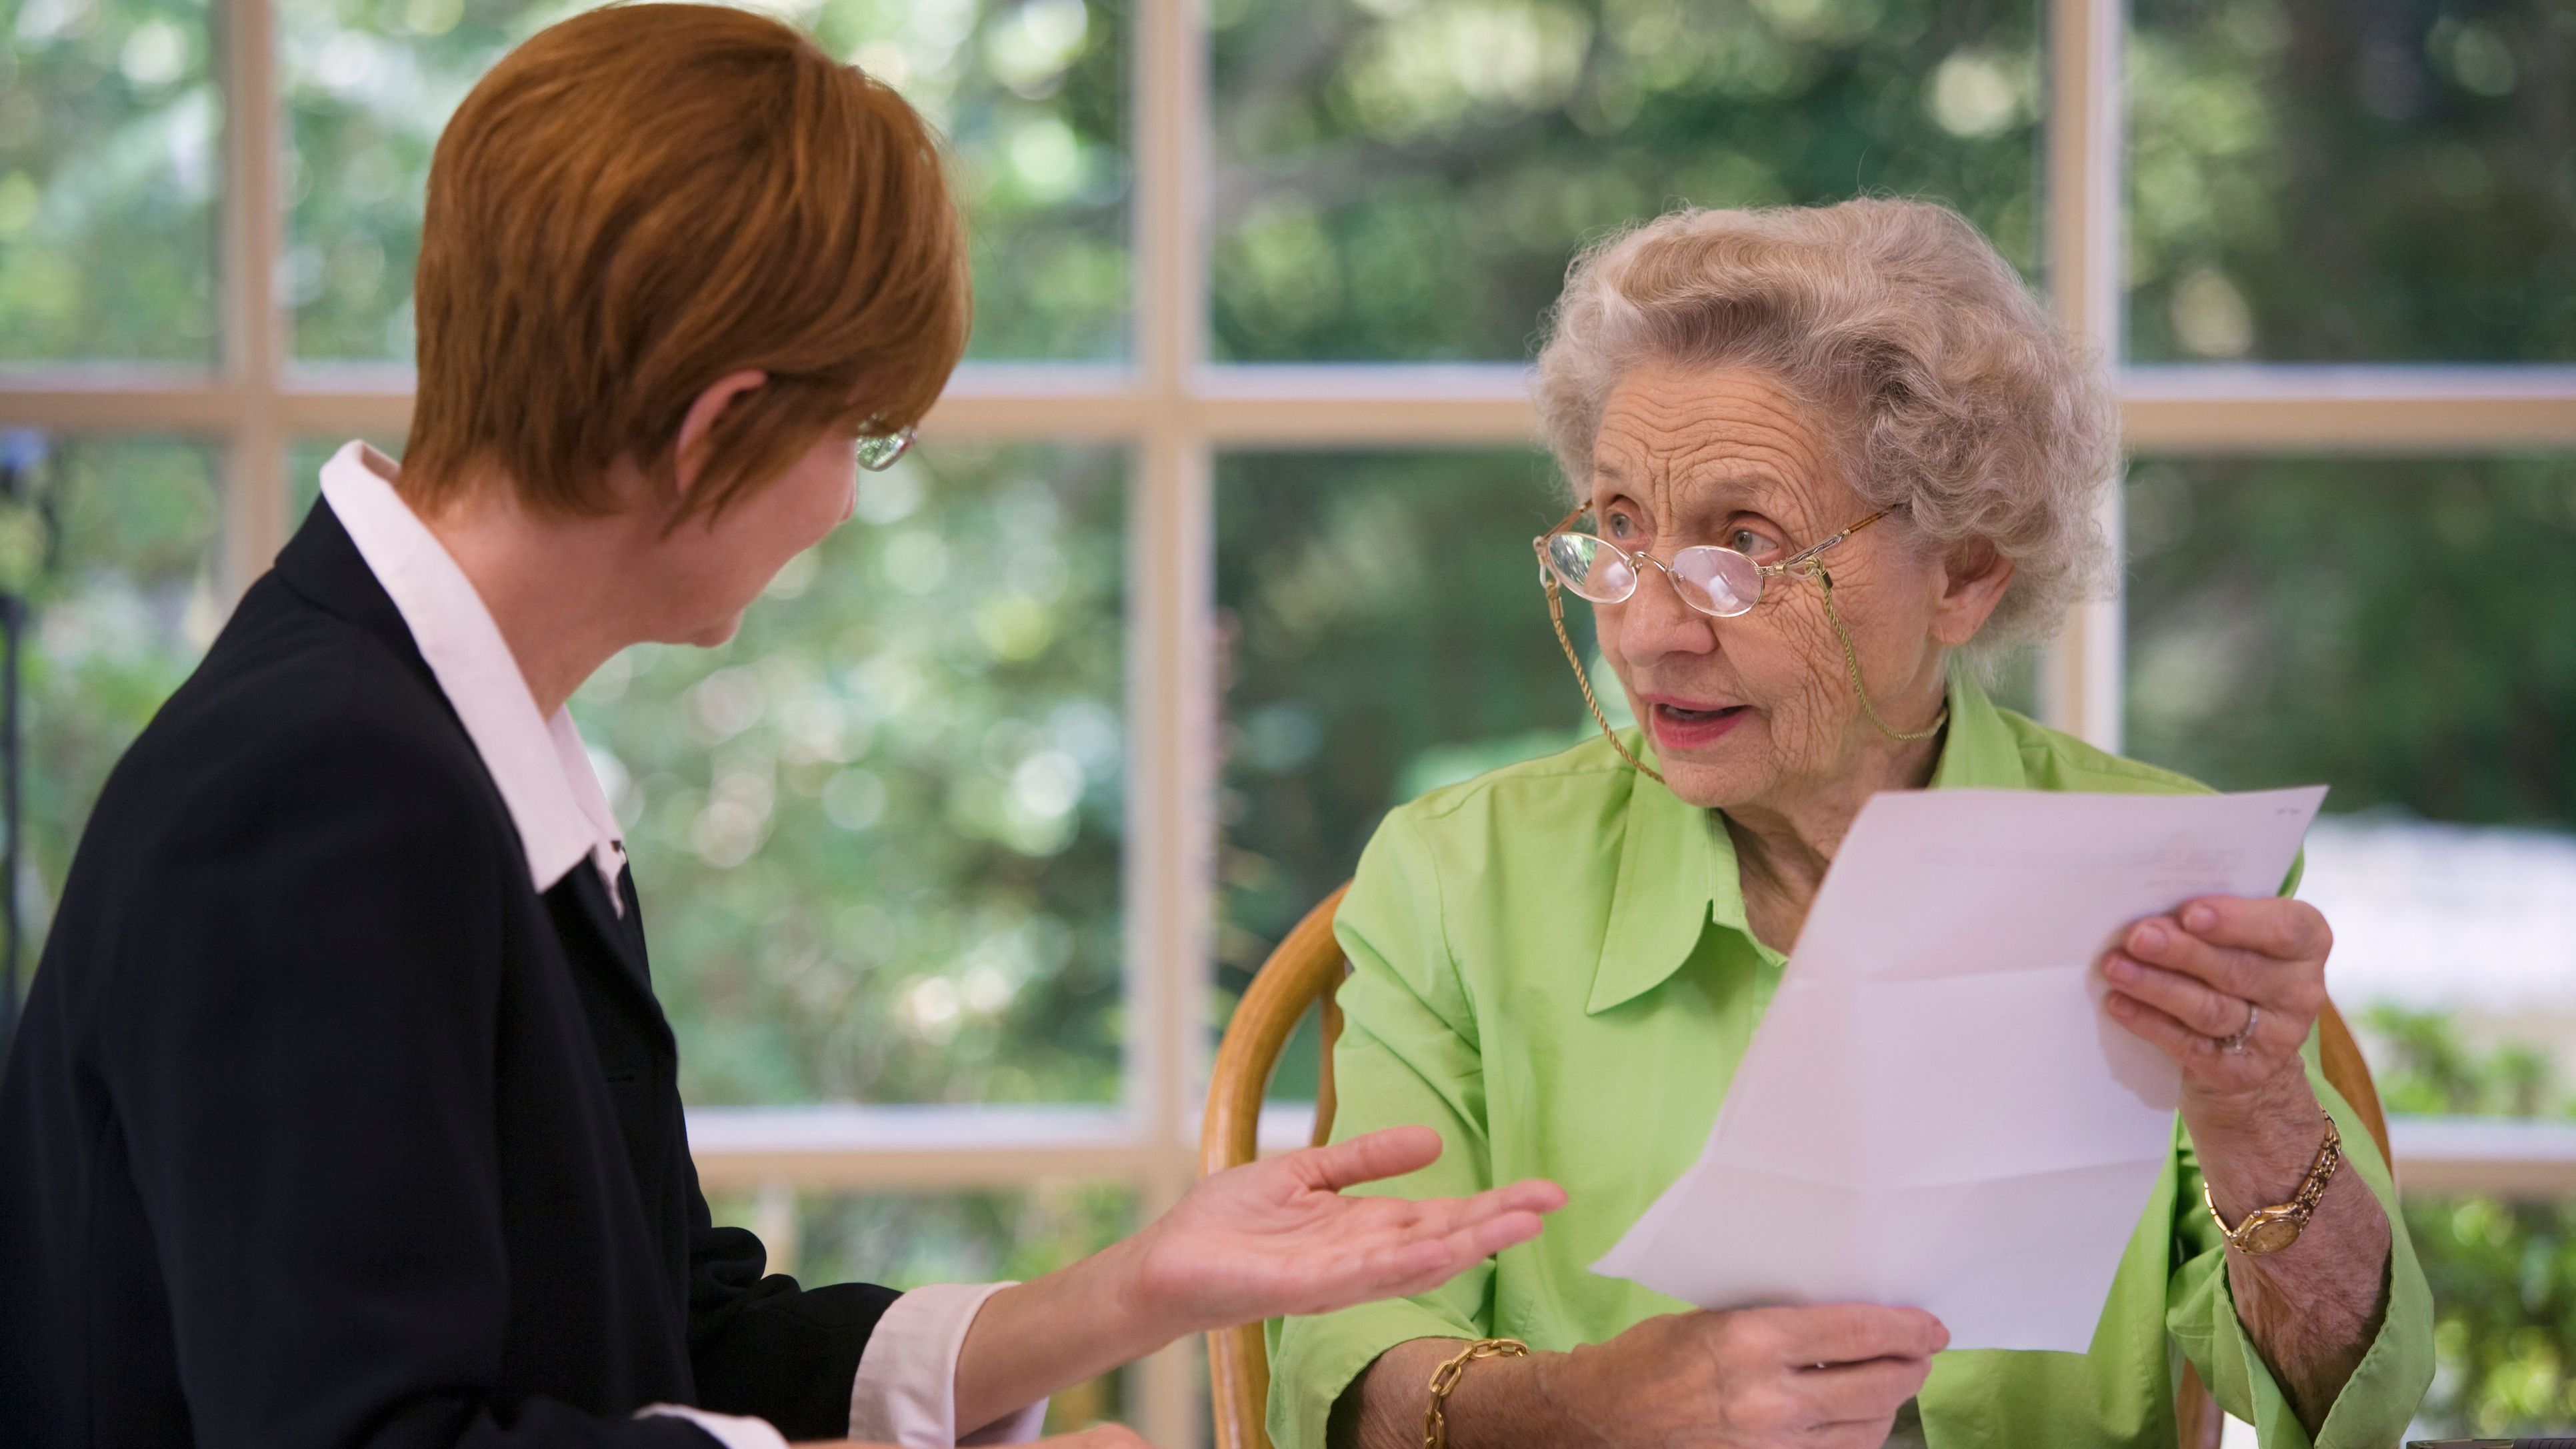 An estate planning attorney meets with a client to discuss her will.